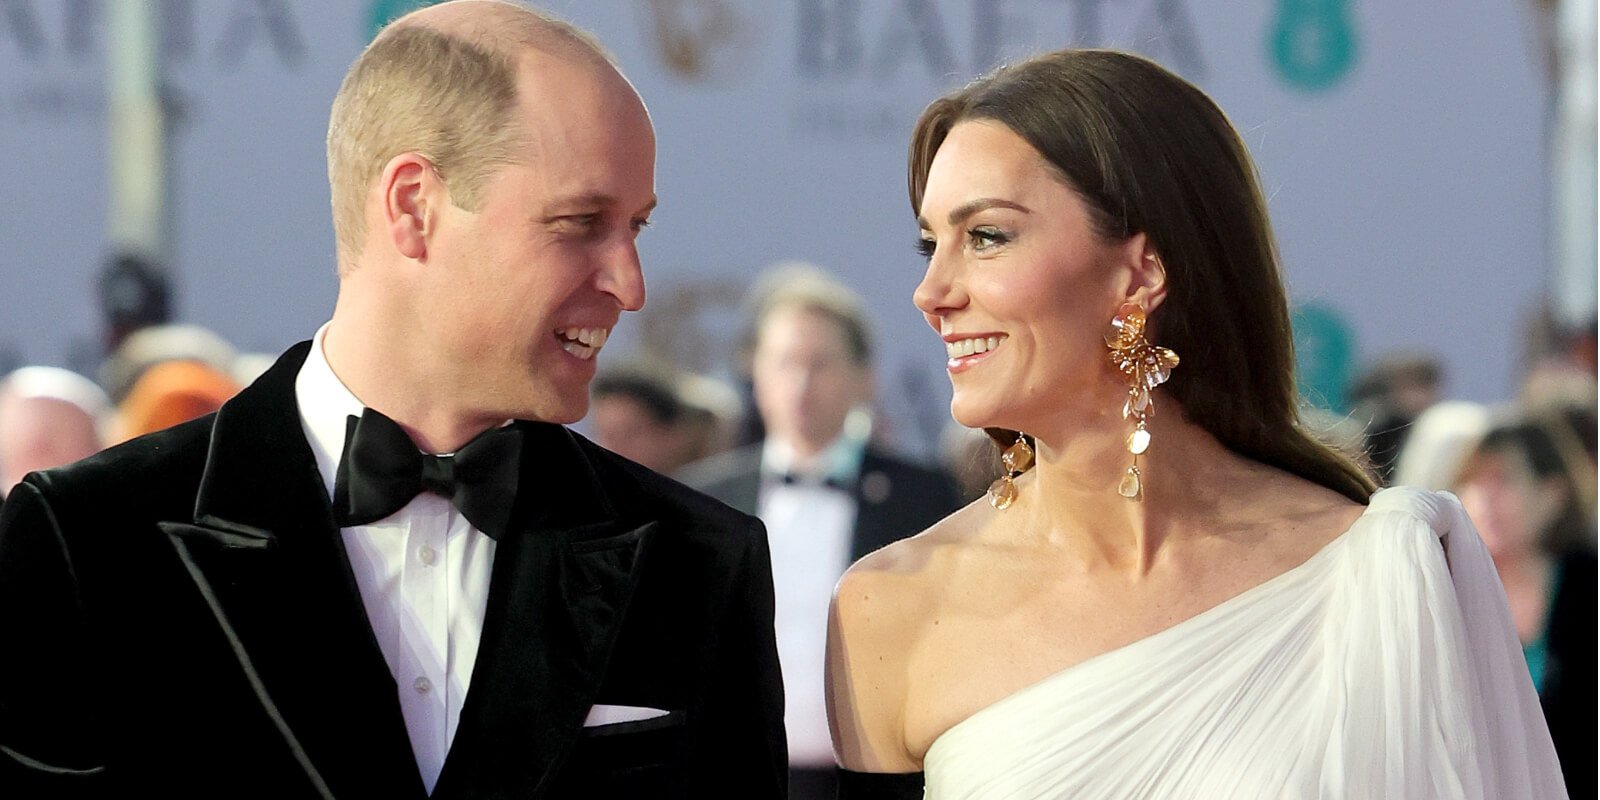 Body Language Expert Claims Prince William and Kate Middleton's PDA Is ...